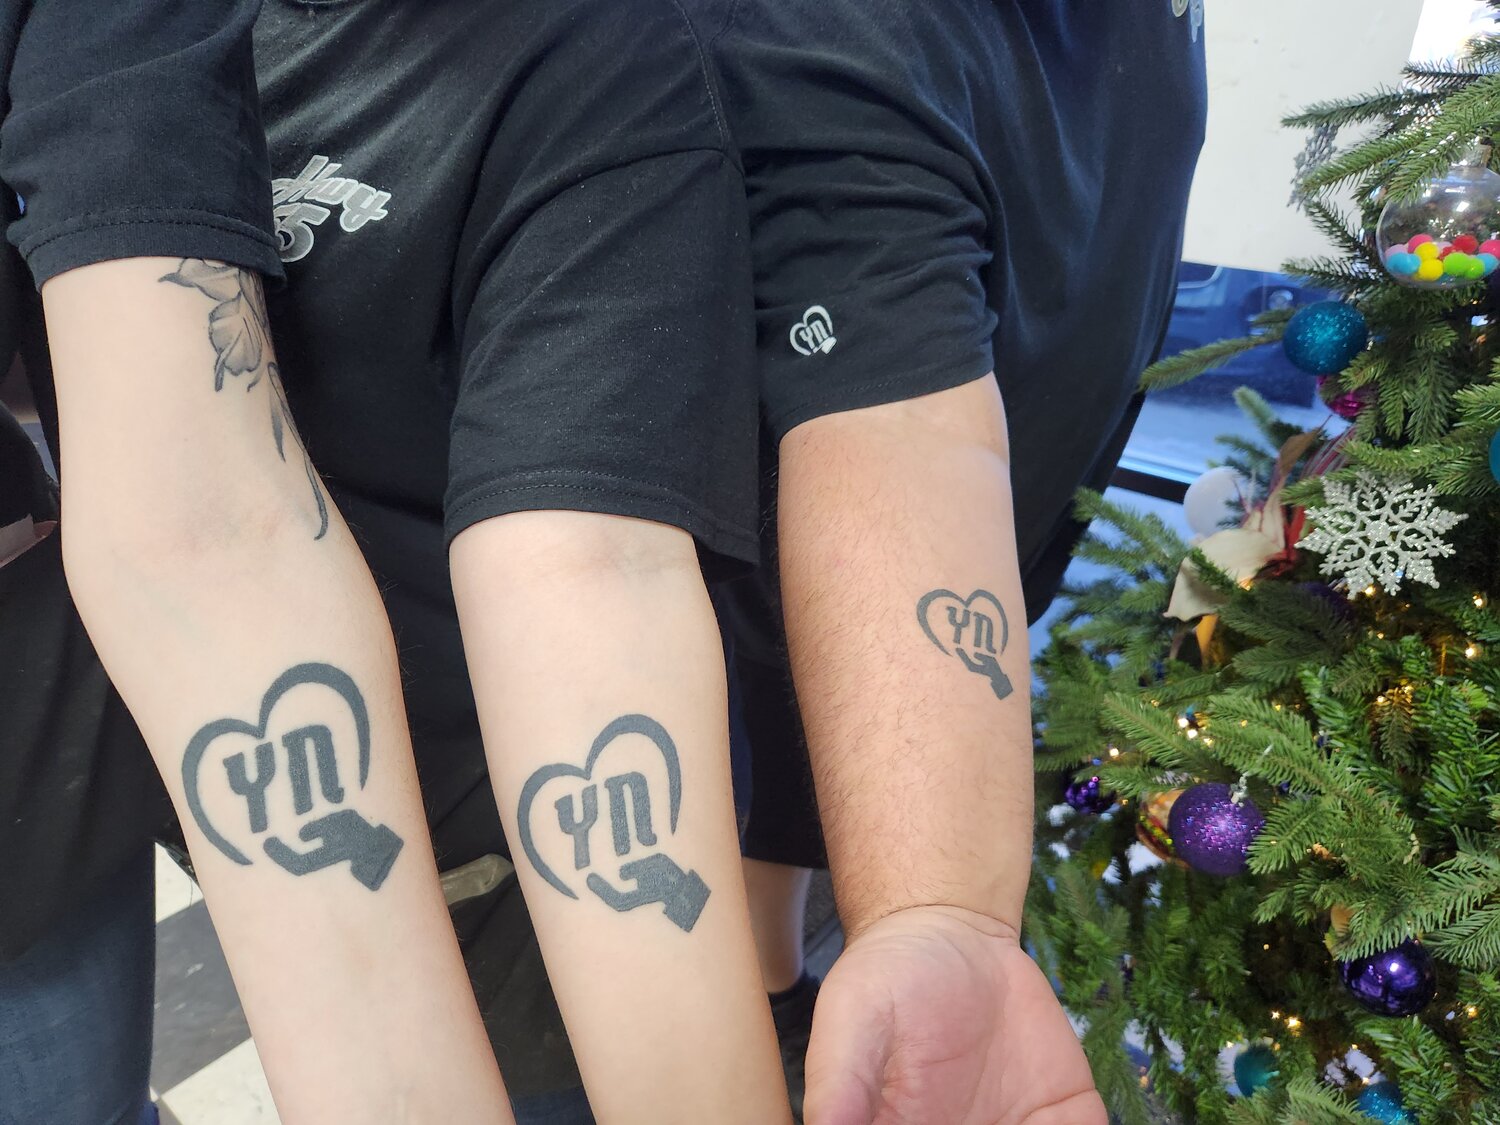 Members of the team at Hwy. 55 Burgers, Shakes and Fries in Red Bank show off “Love Your Neighbor” tattoos.